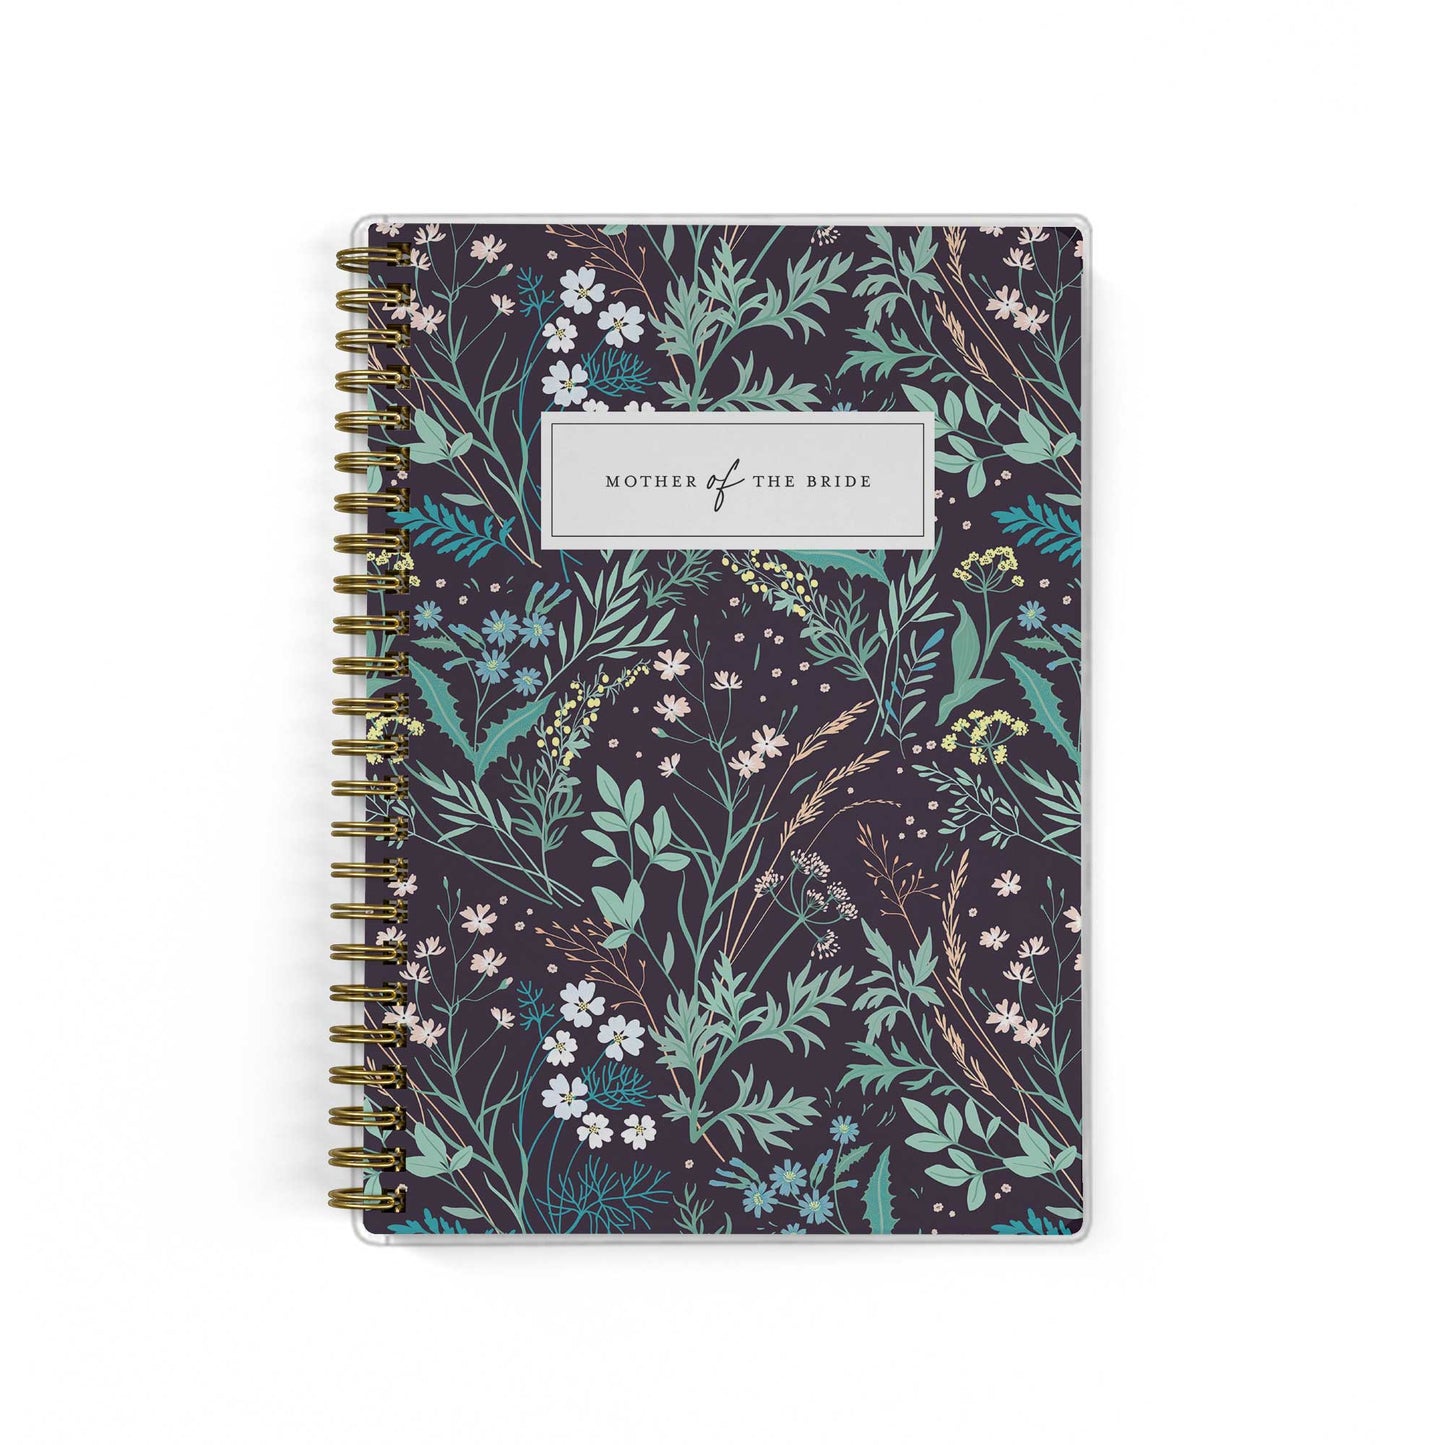 Shown in a black wildflower print, Mother of the Bride planners are exclusive to Wicked Bride.